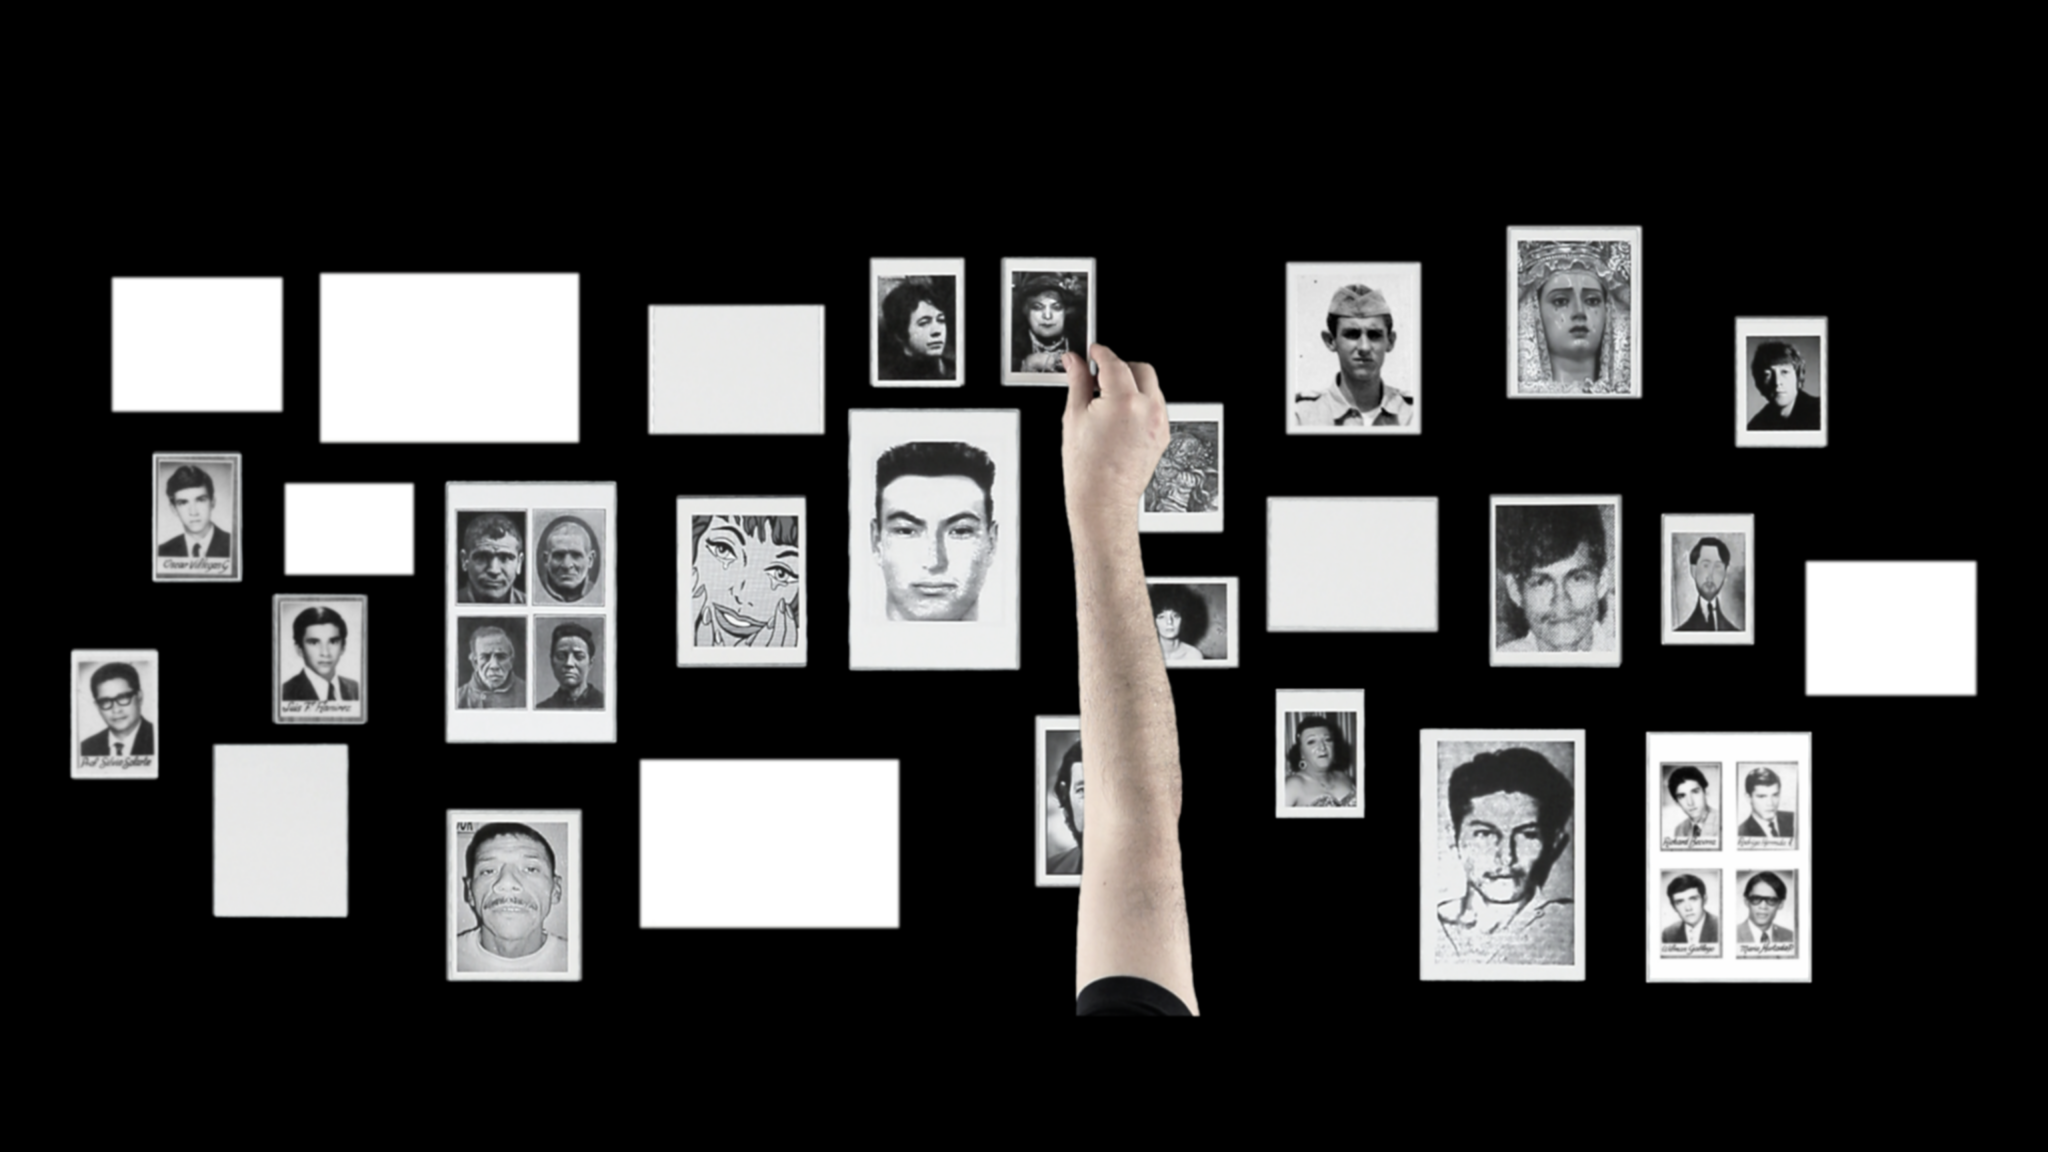 An arm stretches out across various portrait shots of different people over a black background.